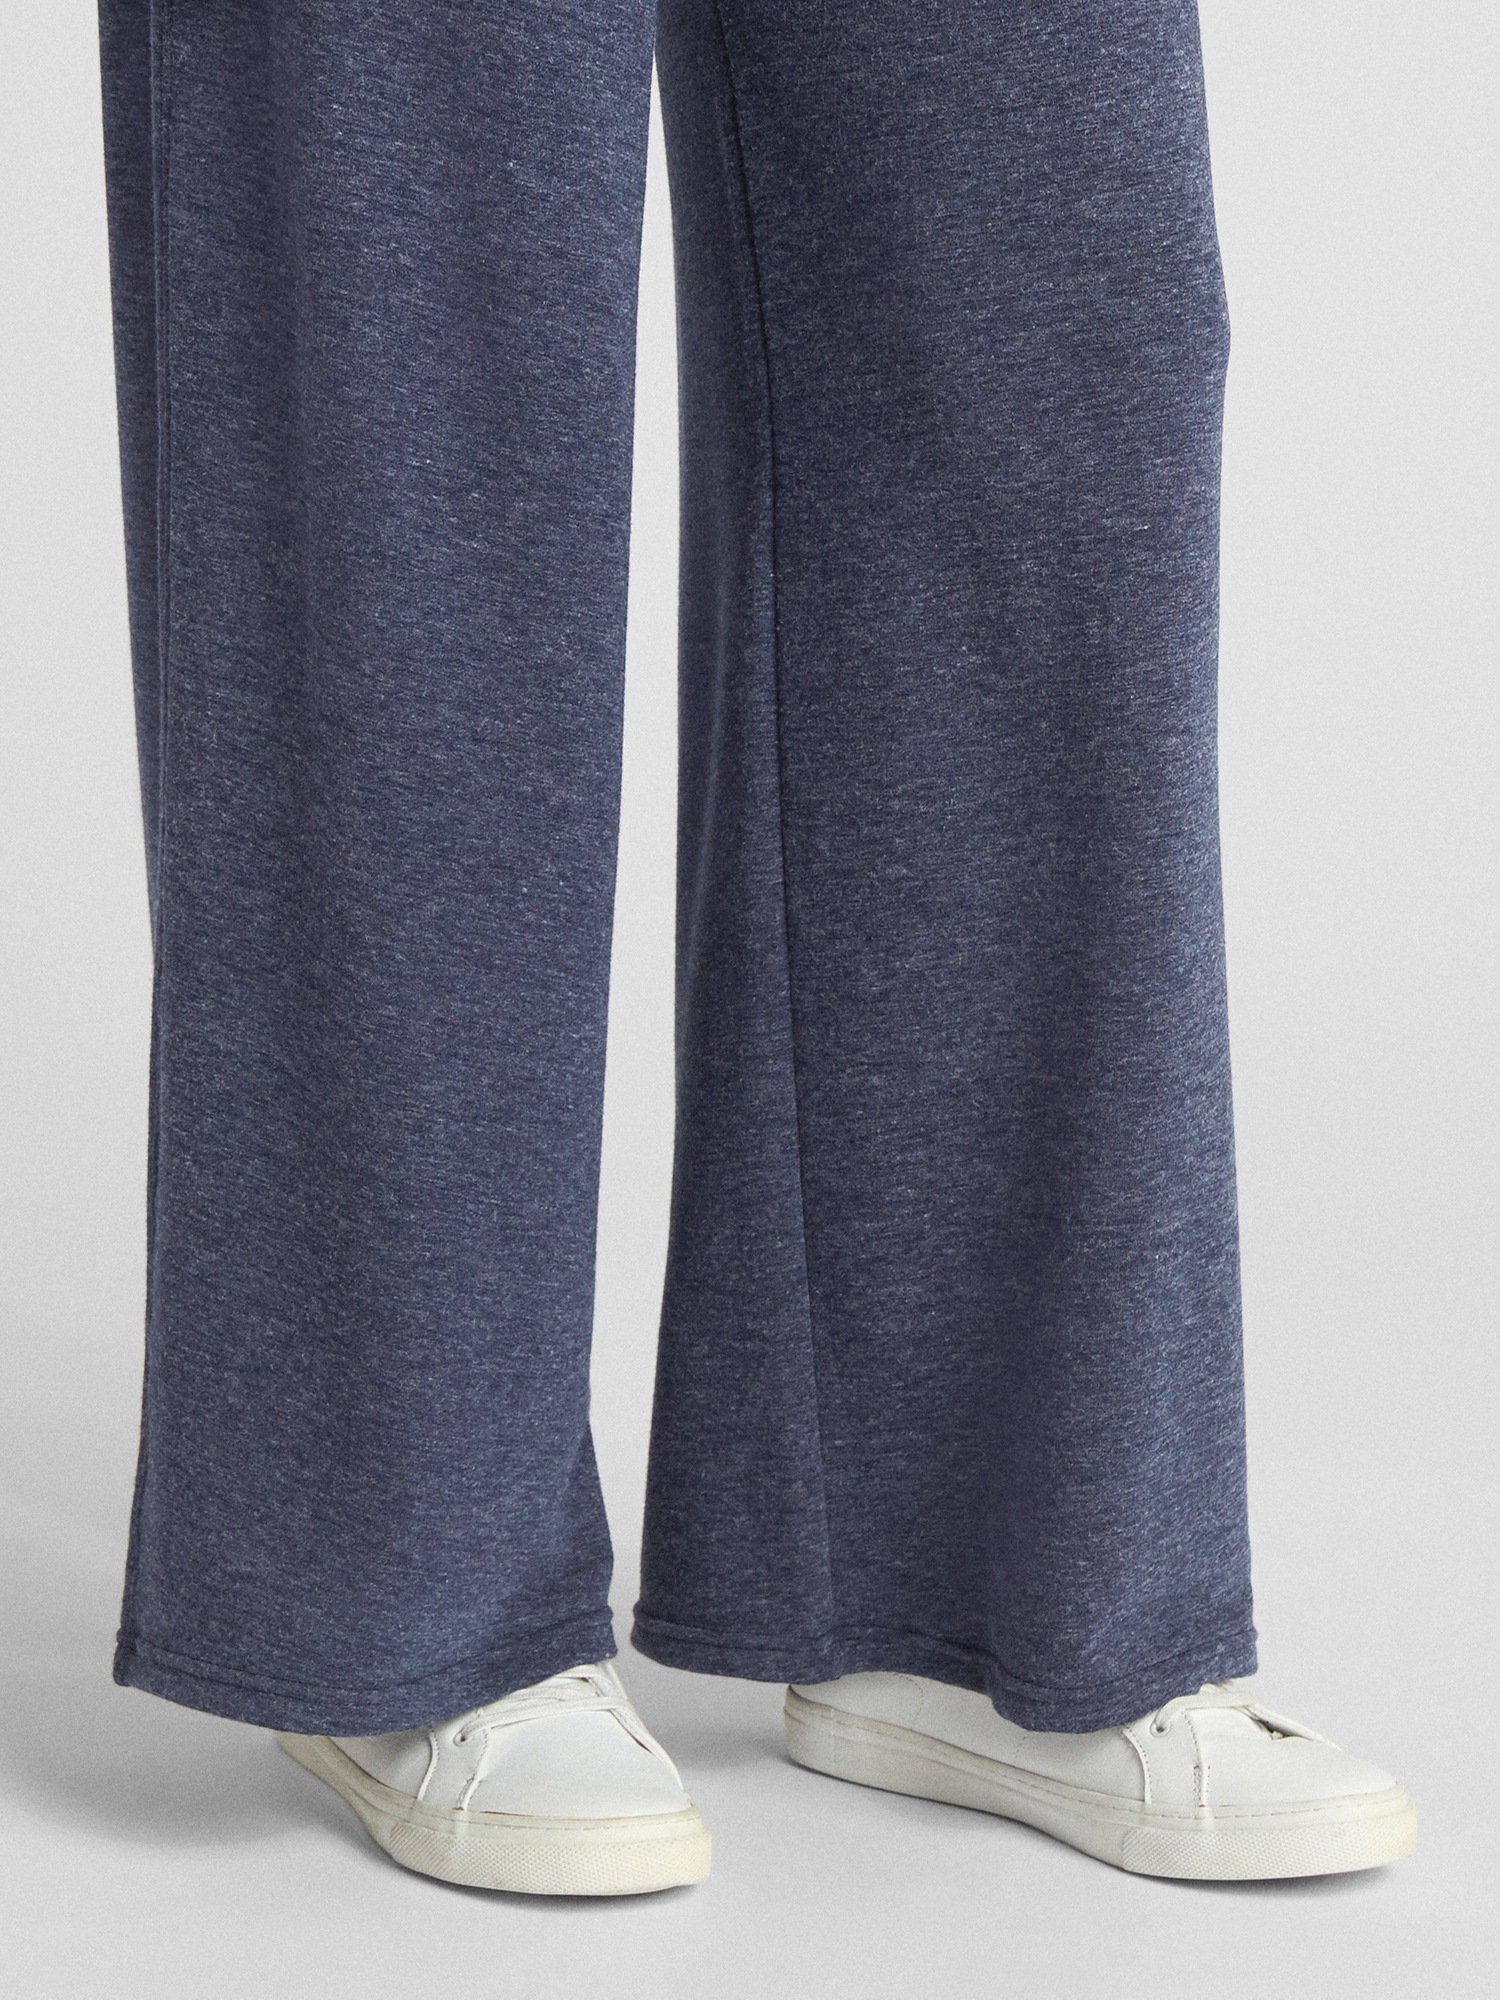 Women's Wide Leg Drawstring Lounge Pants • Size: L/XL (Sizes 10-14) •  Approximately 42 in Length • 30 Inseam • 100% Polyester • Drawstring  high-rise waistband • Two pockets for keeping your